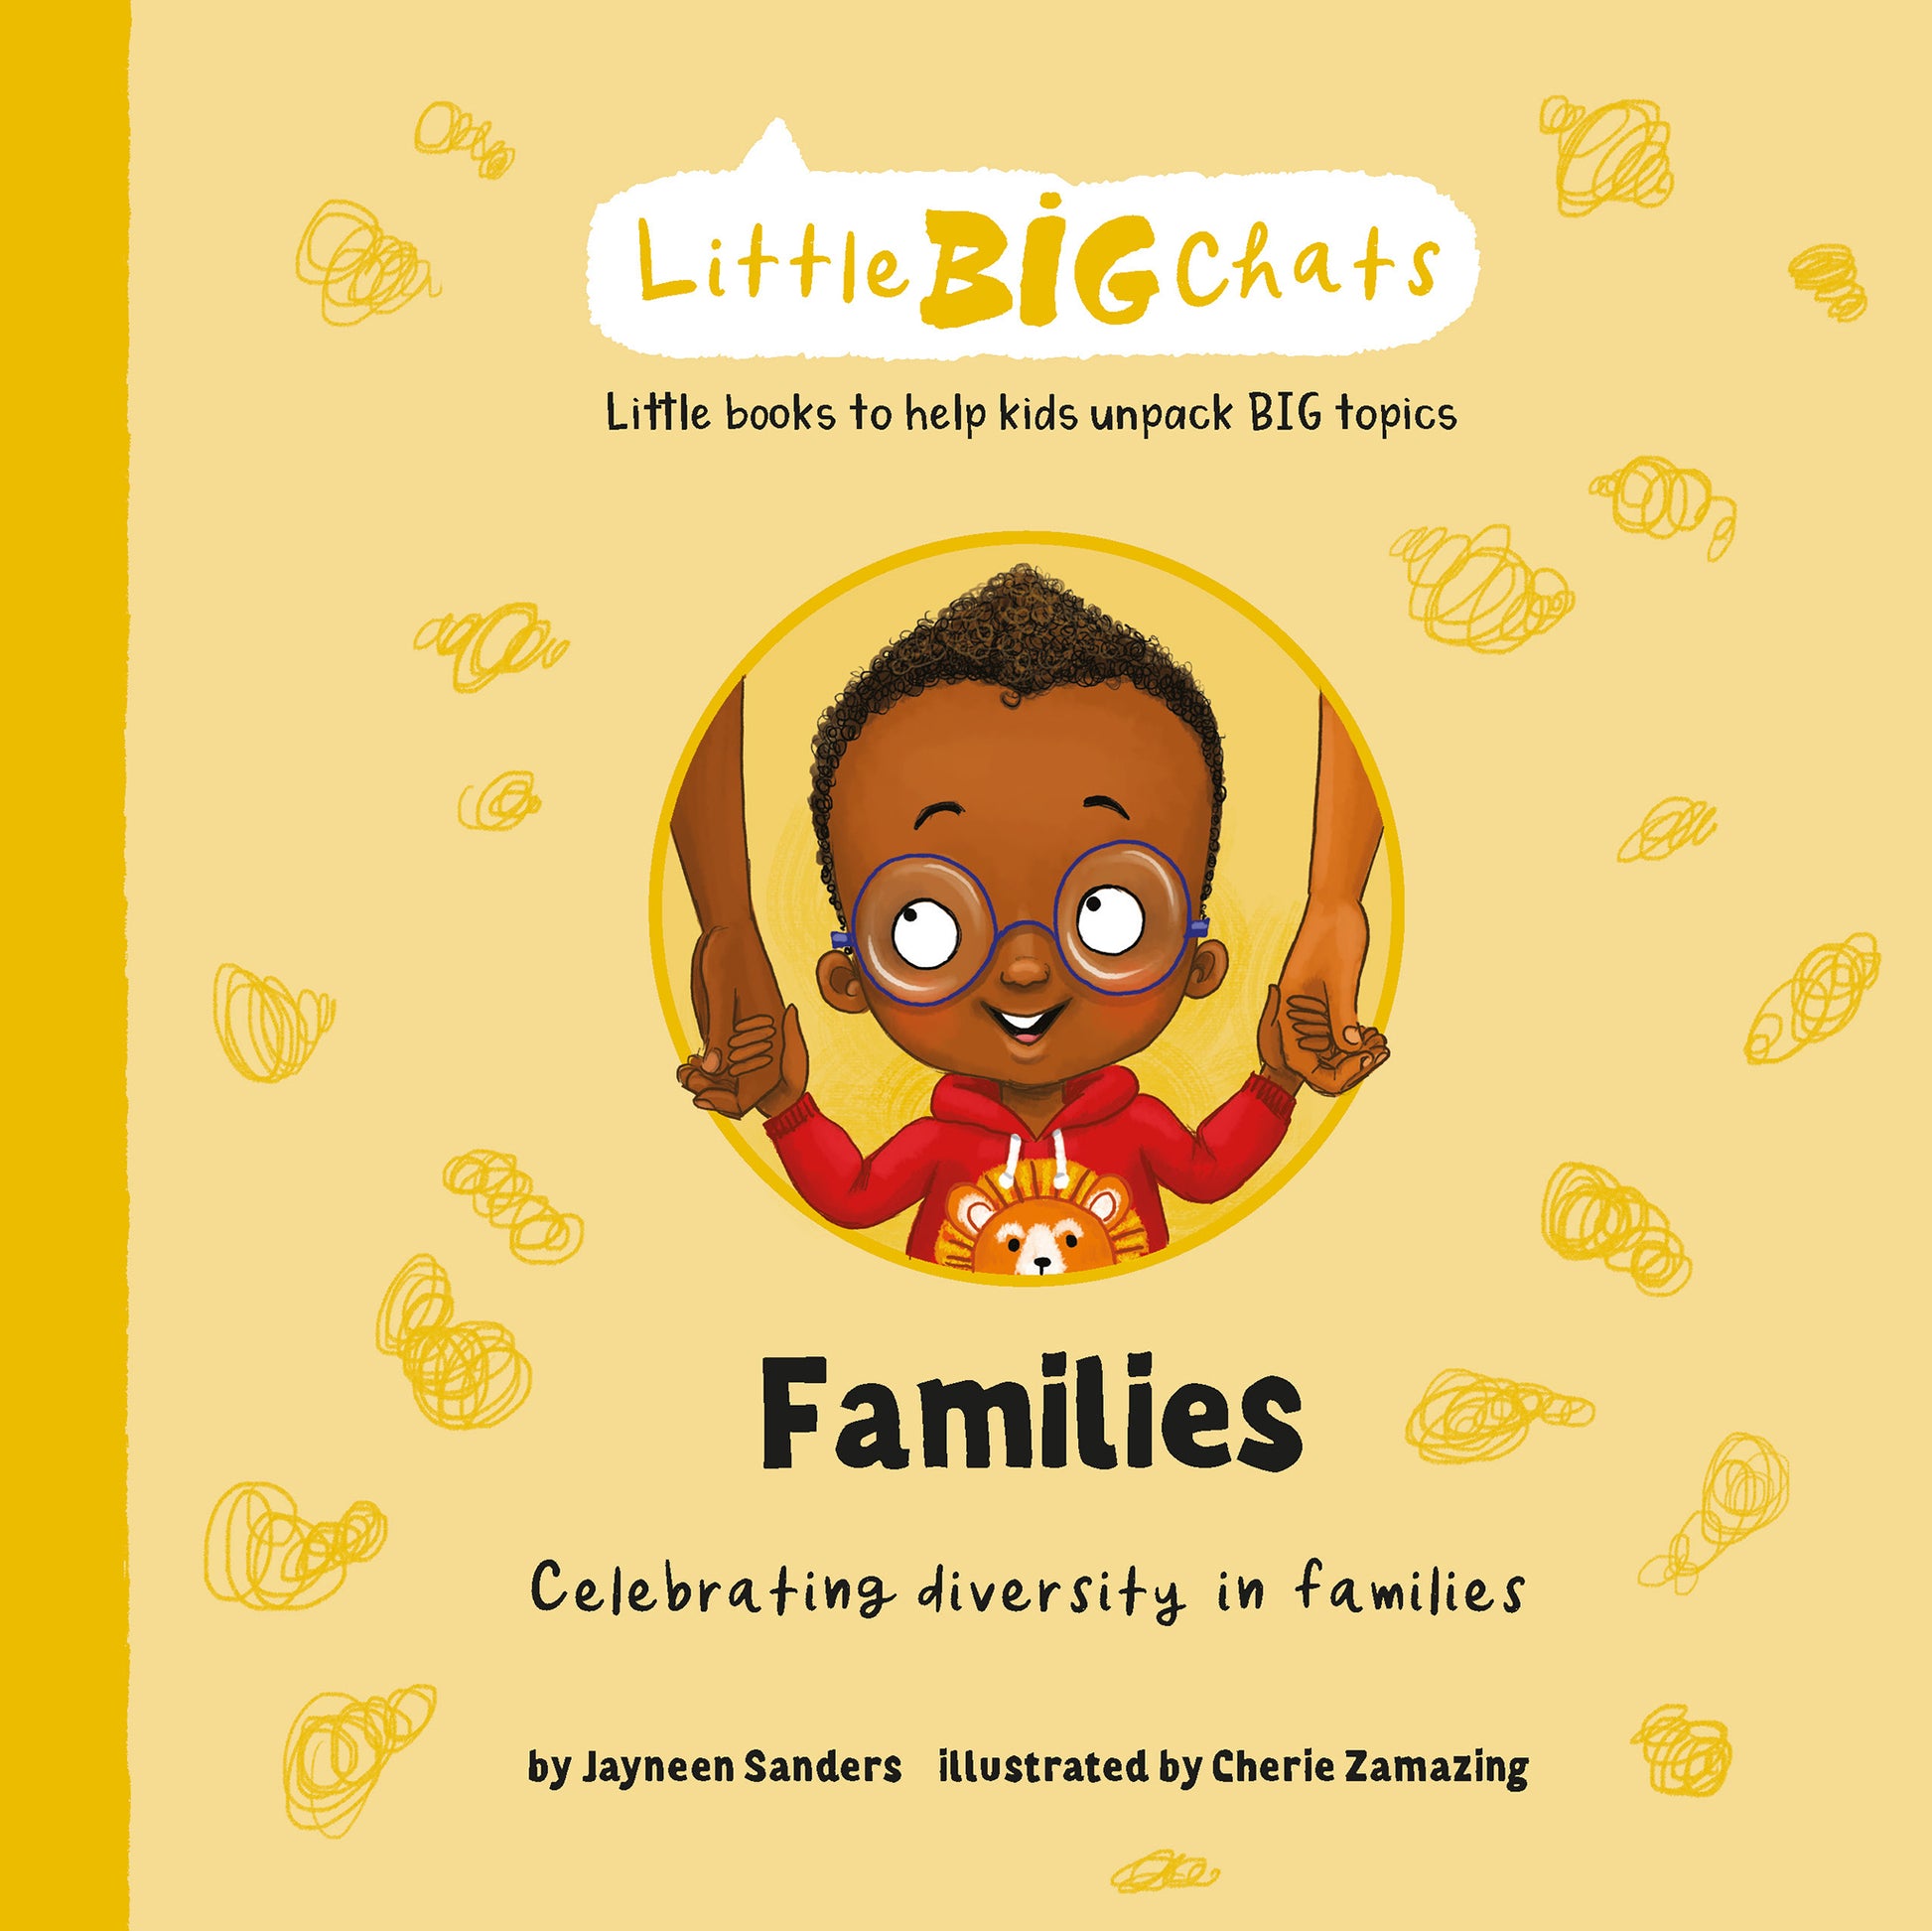 The cover of the Little BIG Chats book ‘Families’ by Jayneen Sanders.